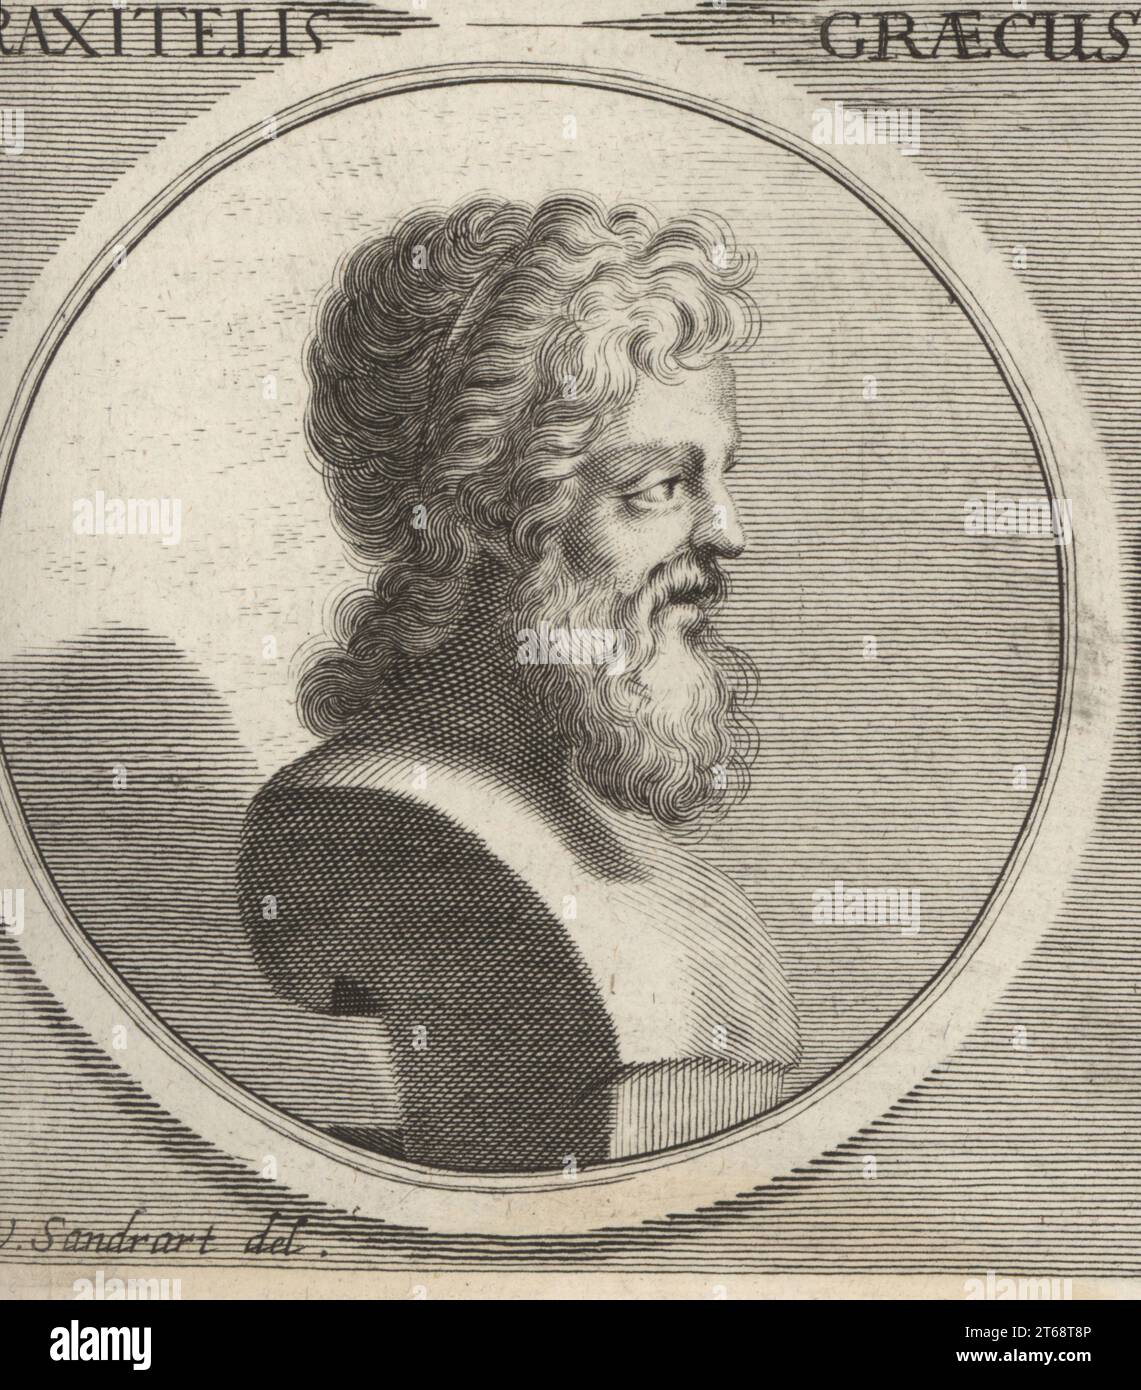 Praxiteles, greatest of the ancient Greek or Attic sculptors of the 4th century BC. Believed to be the son of sculptor Cephisodotus the Elder. Praxitelis Graecus. Copperplate engraving by Philipp Kilian after an illustration by Joachim von Sandrart from his LAcademia Todesca, della Architectura, Scultura & Pittura, oder Teutsche Academie, der Edlen Bau- Bild- und Mahlerey-Kunste, German Academy of Architecture, Sculpture and Painting, Jacob von Sandrart, Nuremberg, 1675. Stock Photo